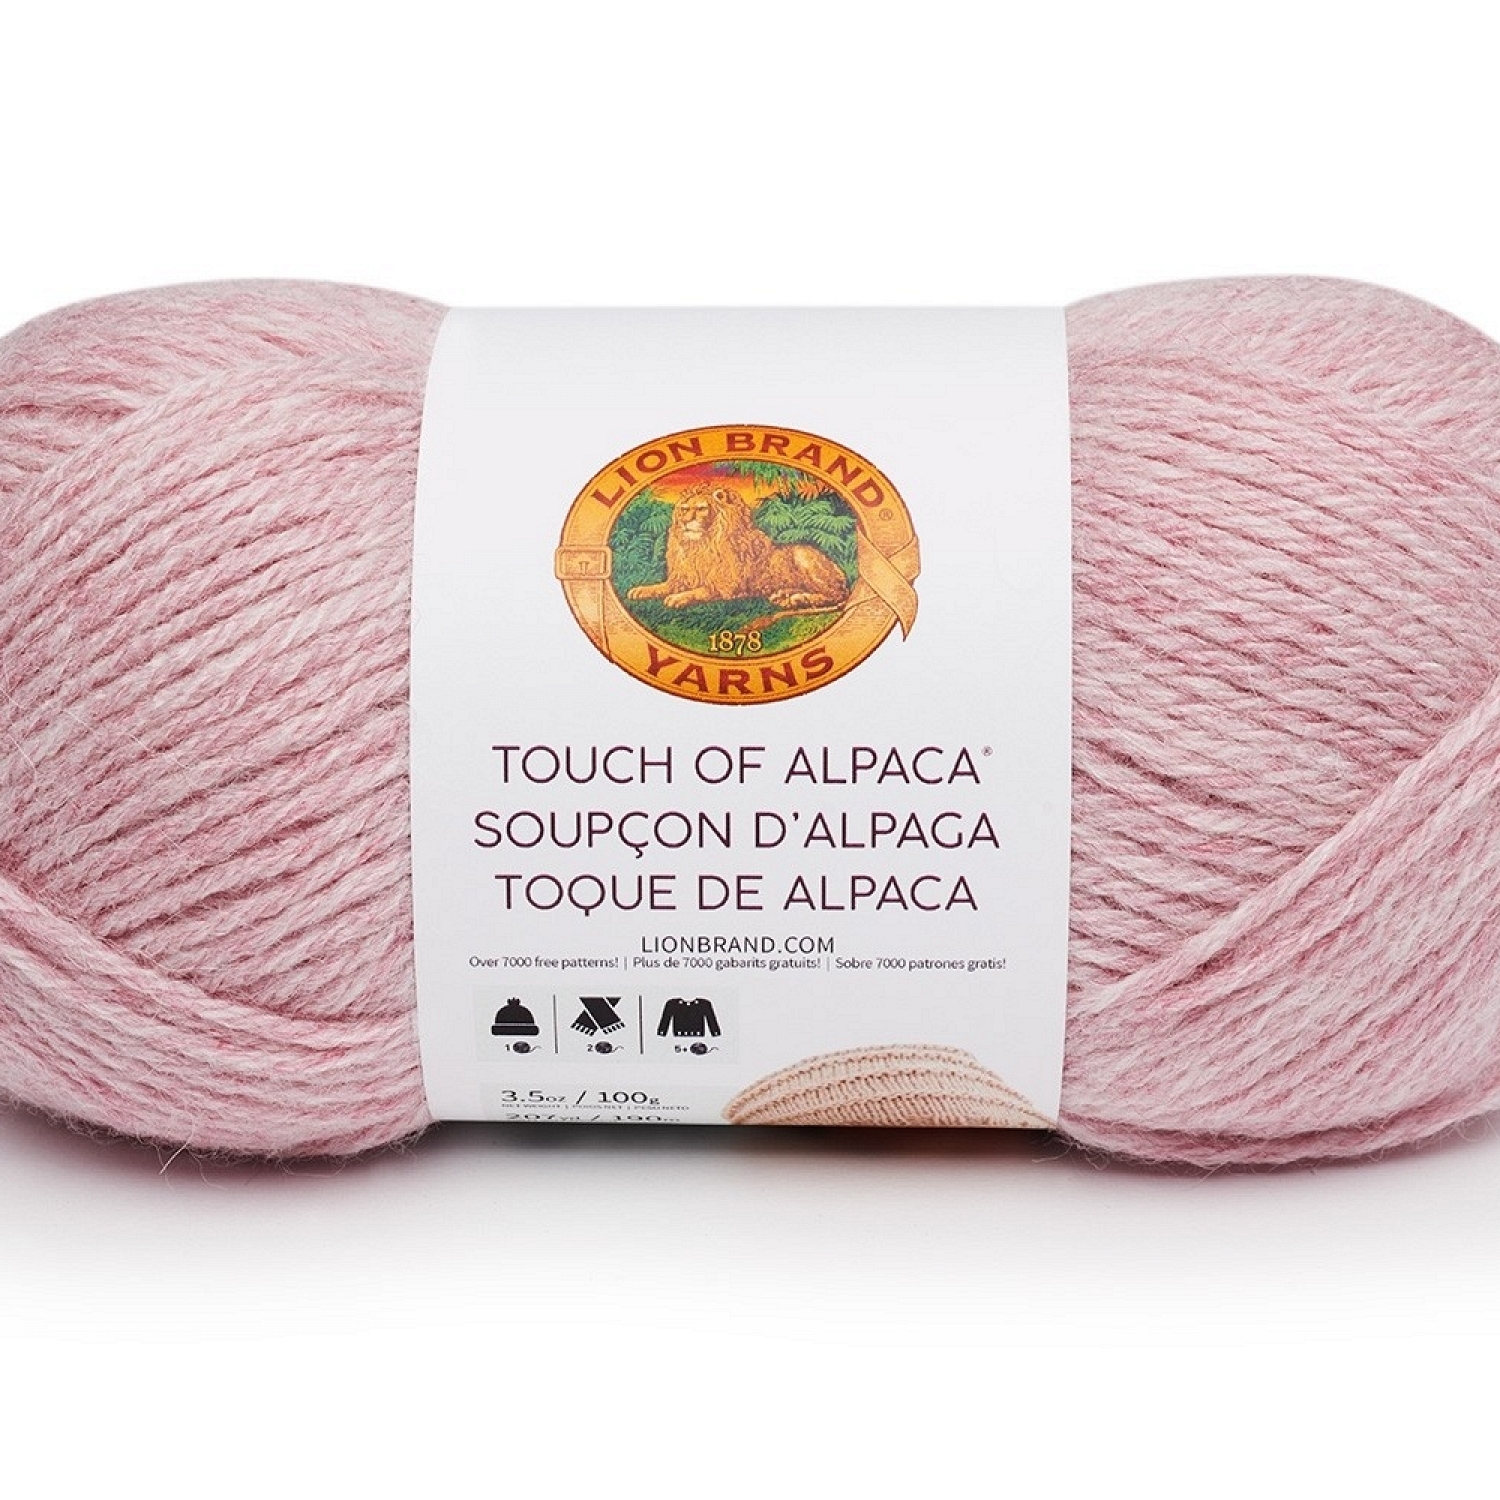 https://lsecom.advision-ecommerce.com/apps/content/files/118/W1800-H1800-touch-of-alpaca-104-blush.jpg